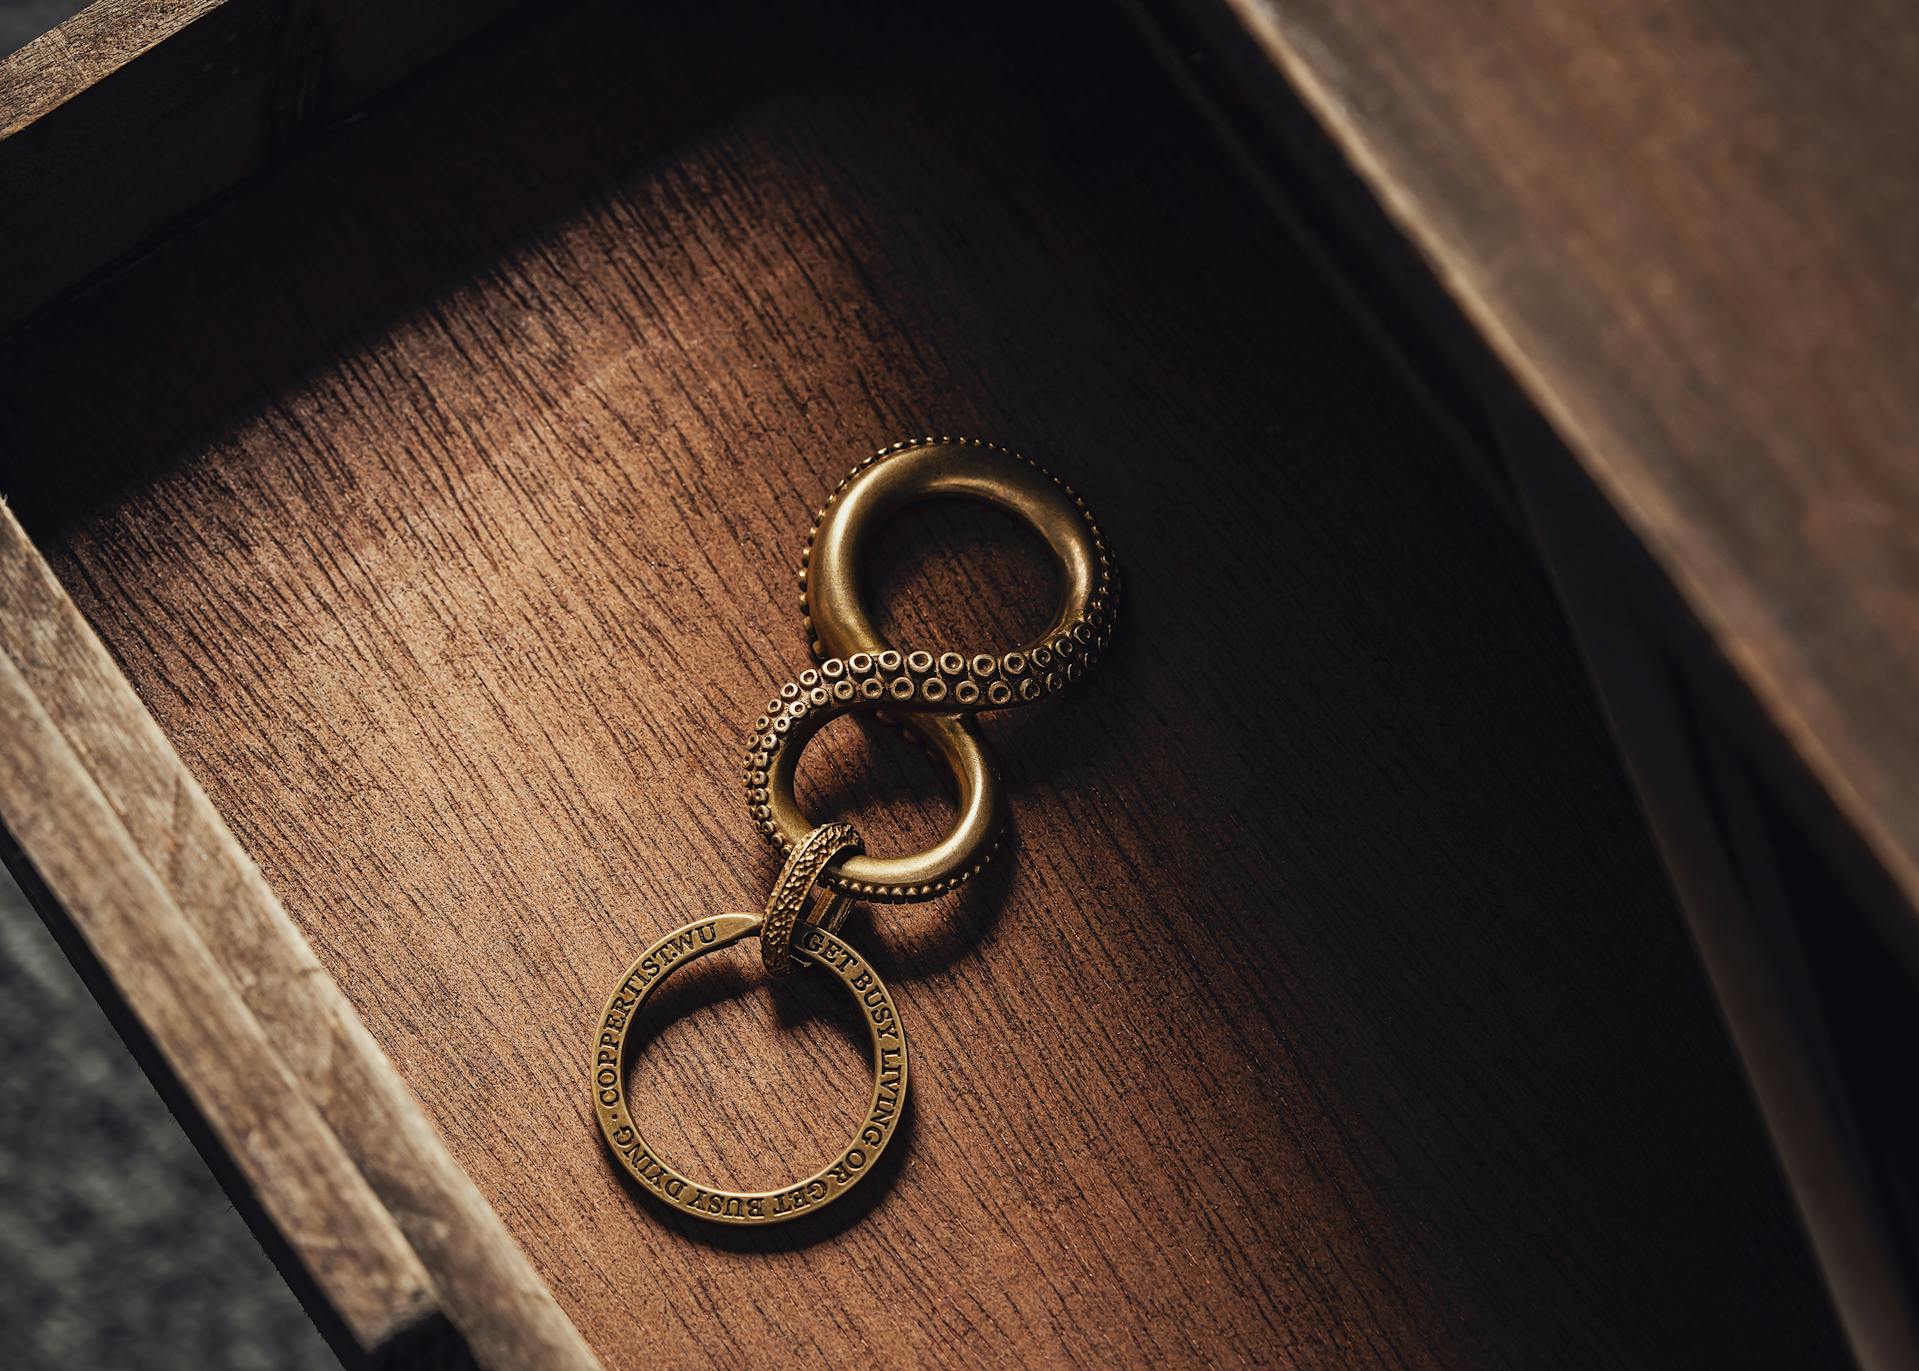 An open drawer with a keyring | Source: Pexels